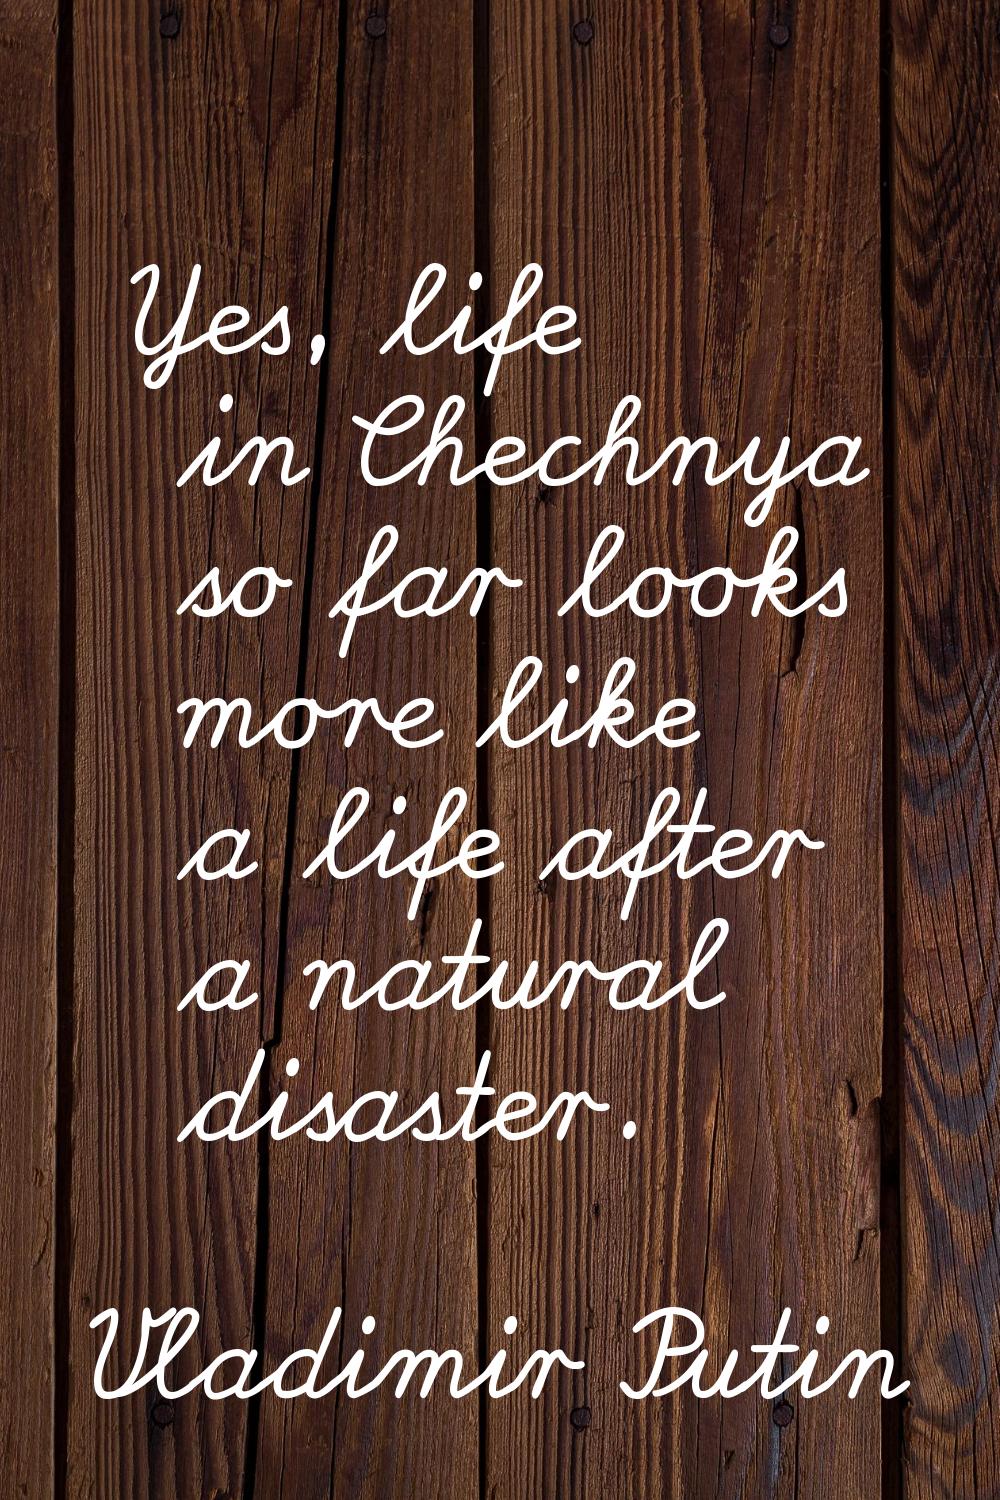 Yes, life in Chechnya so far looks more like a life after a natural disaster.